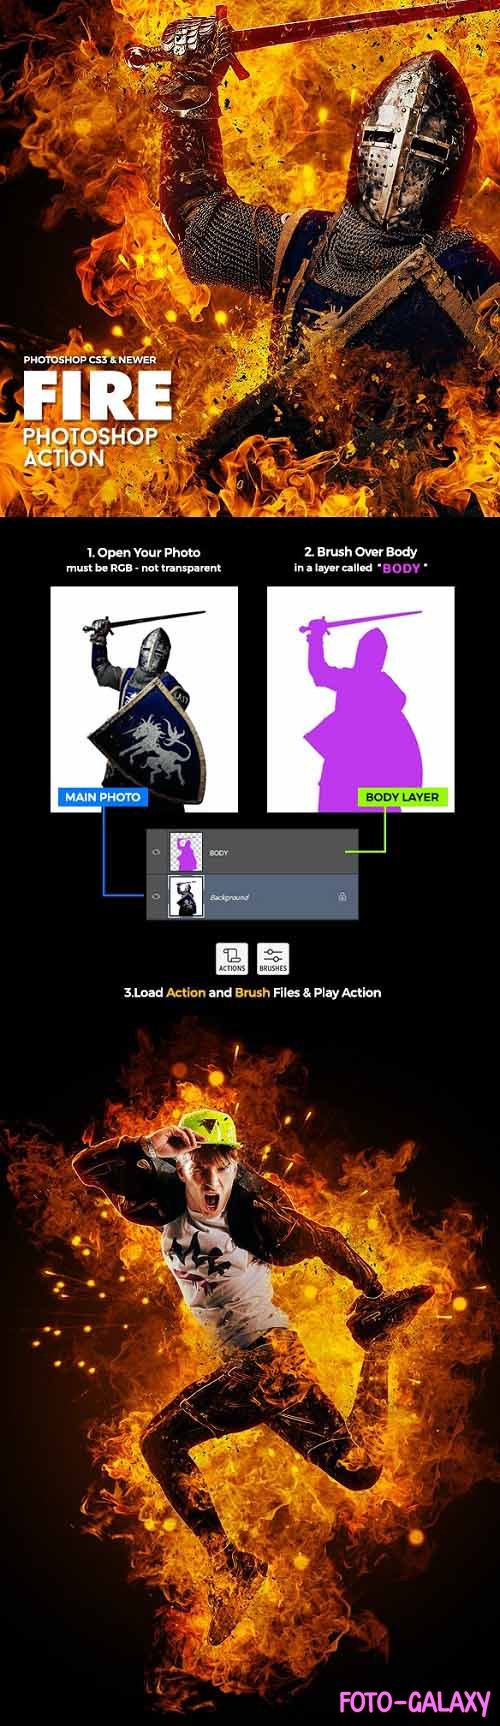 Fire Effect Photoshop Action - 35503232